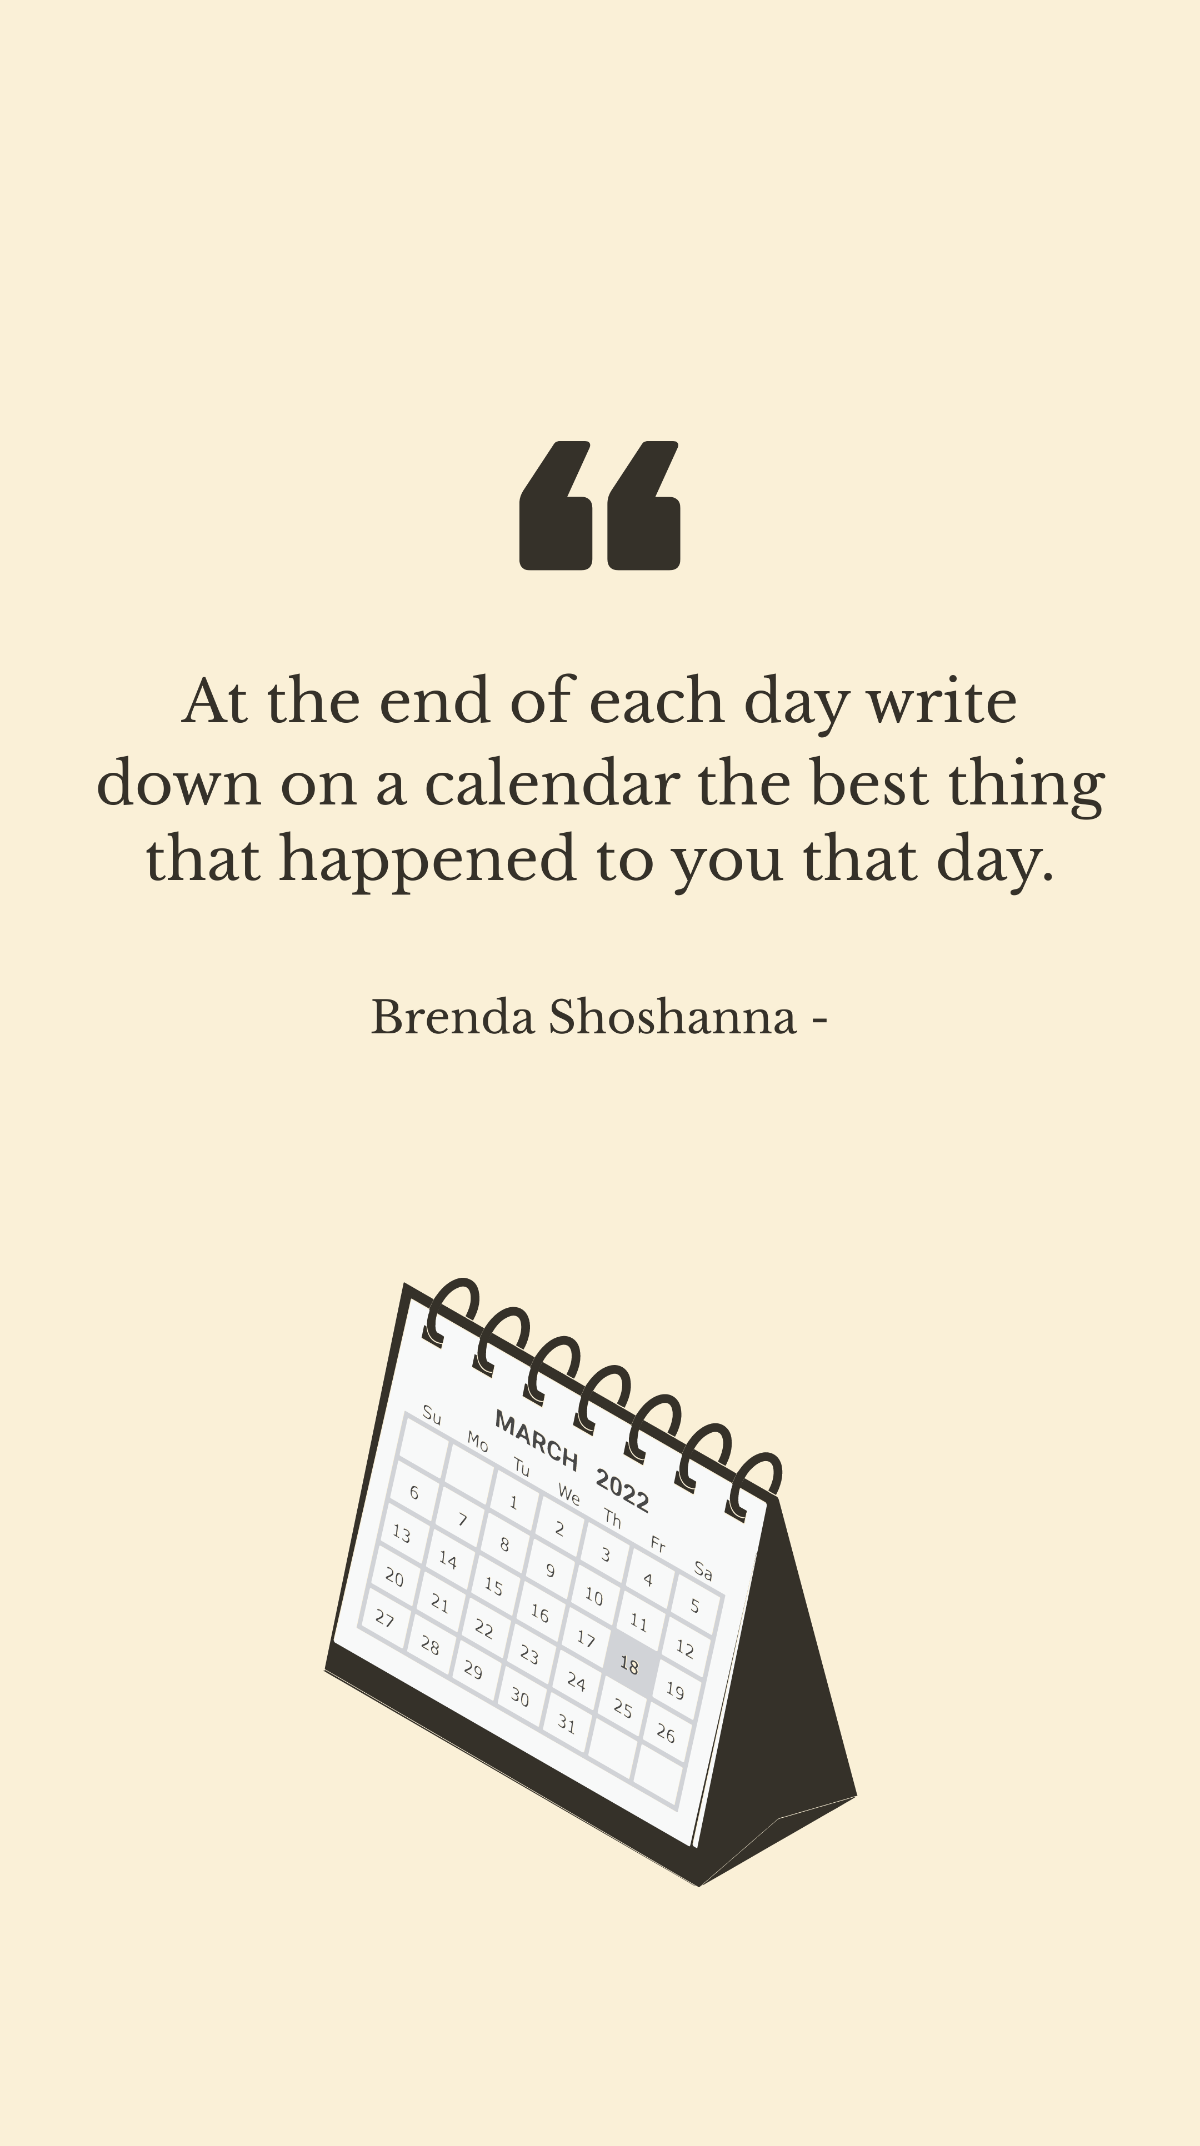 Brenda Shoshanna - At the end of each day write down on a calendar the best thing that happened to you that day. Template